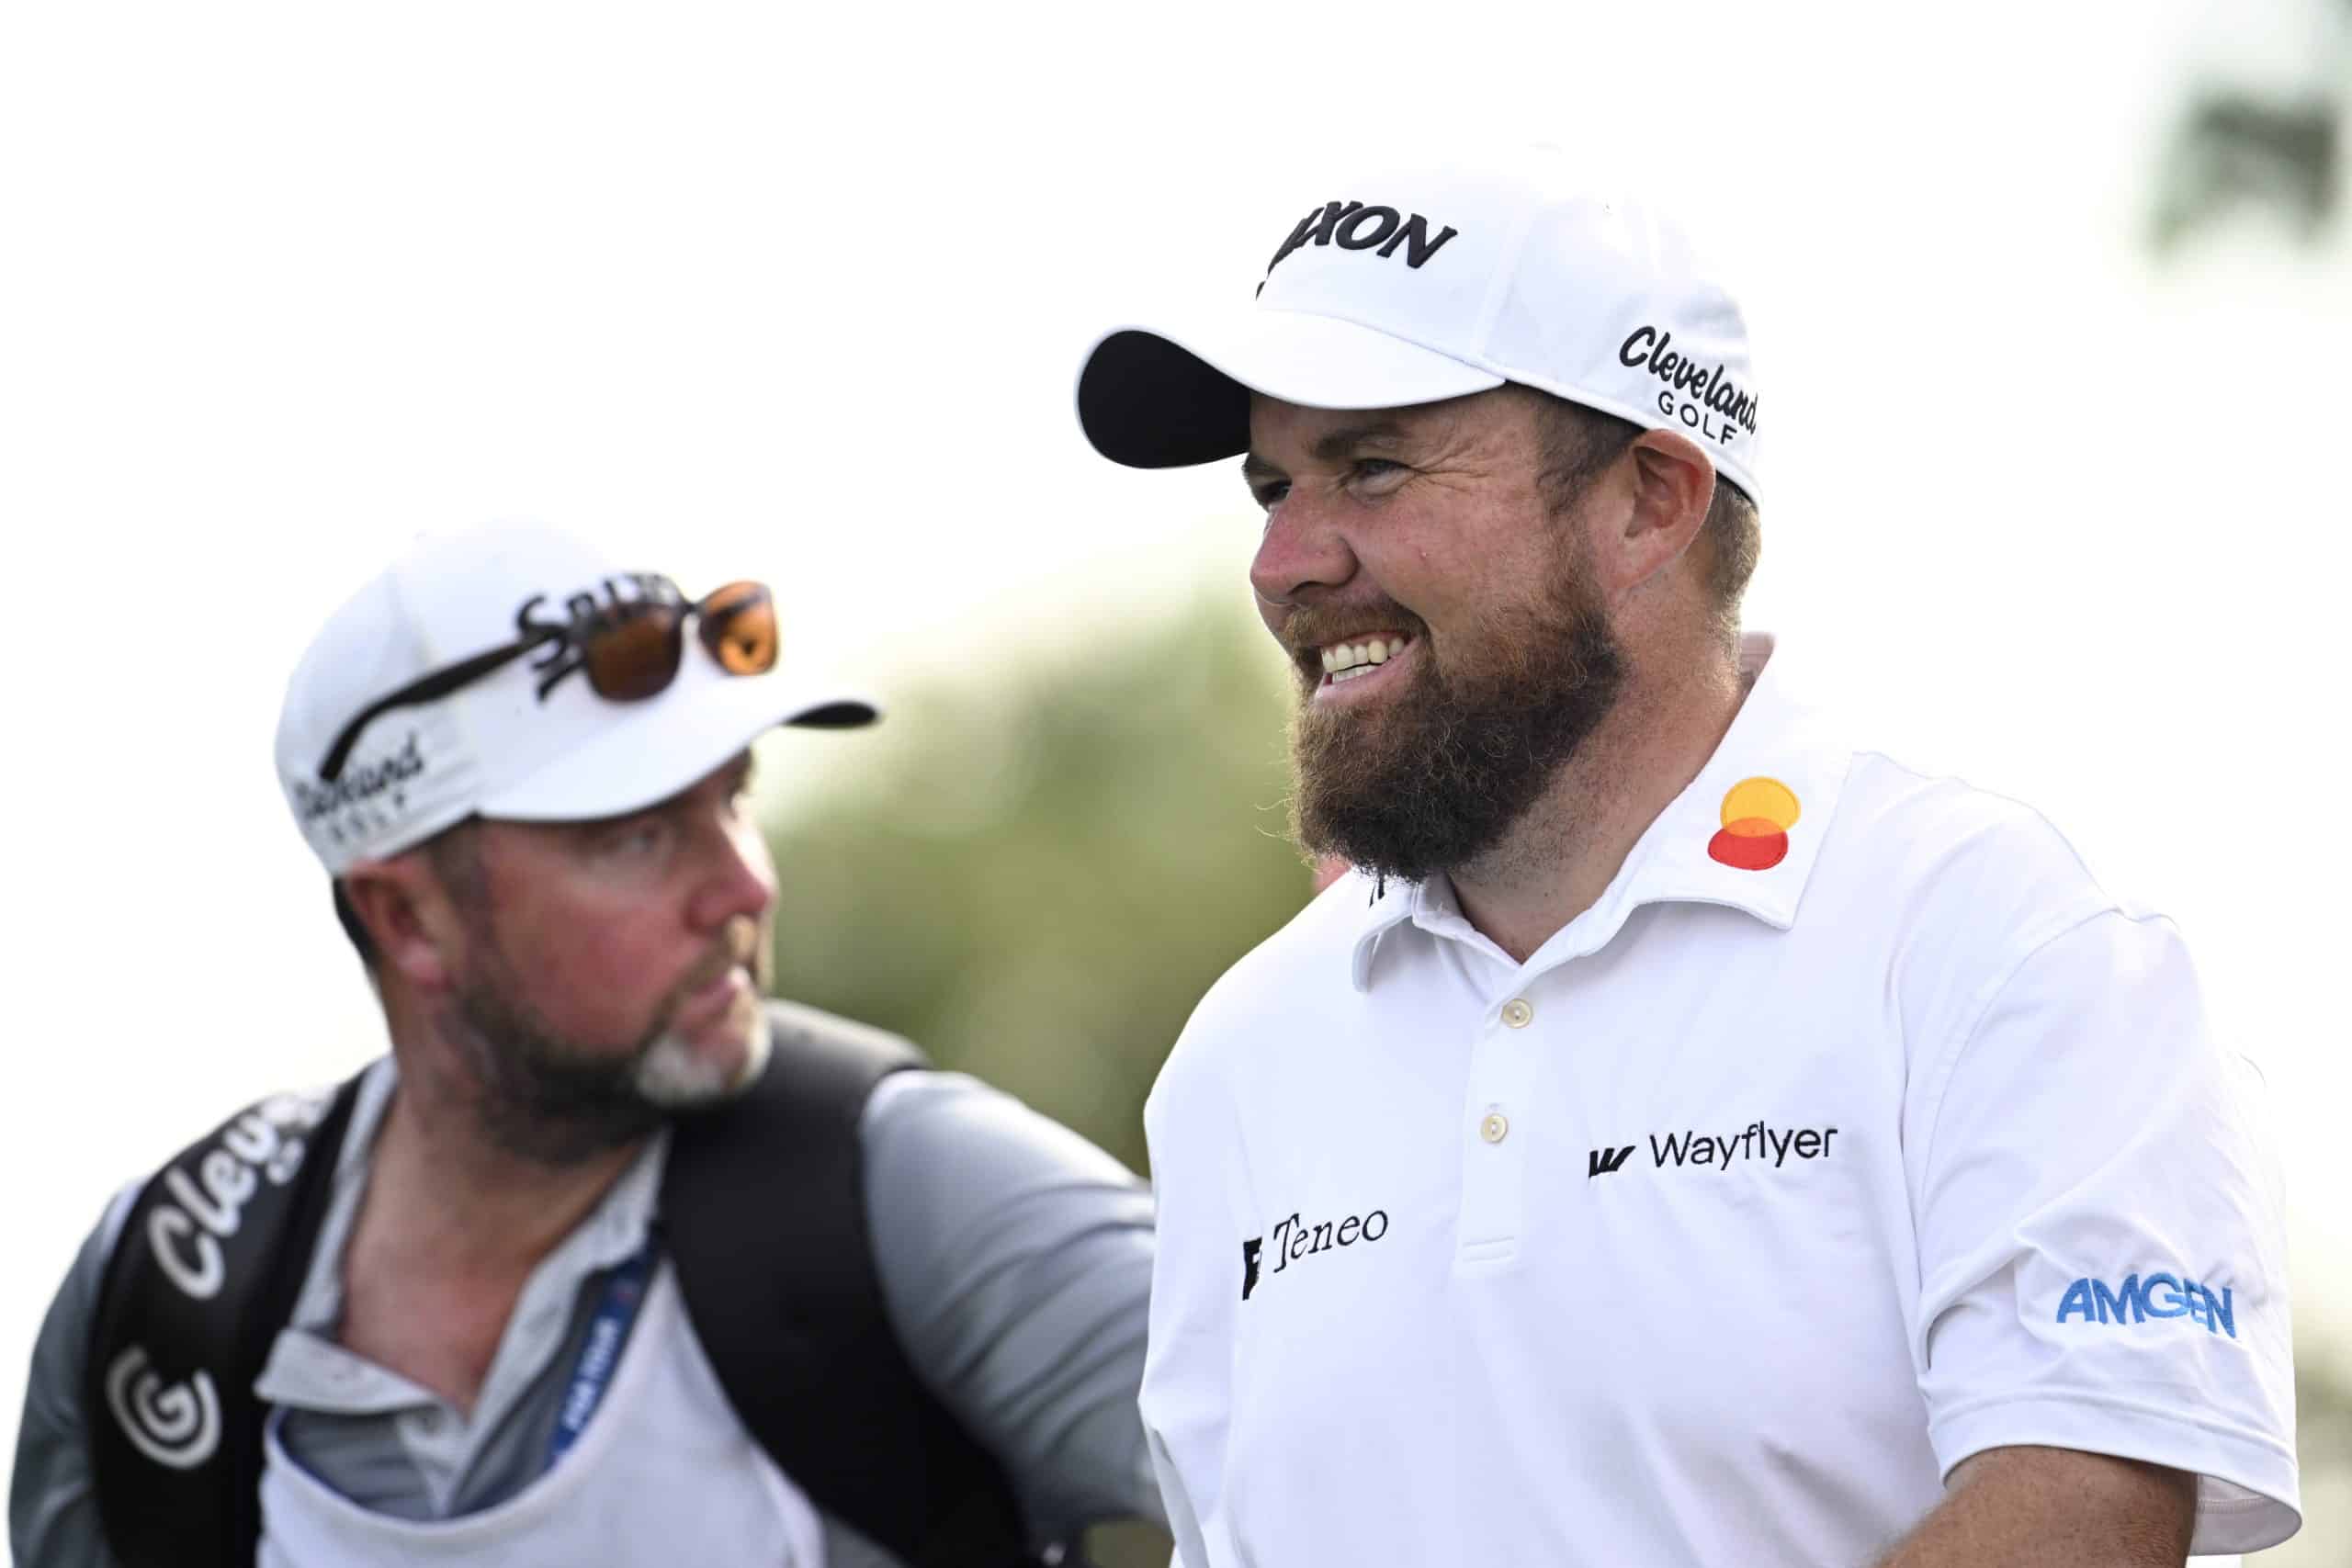 Shane Lowry shows good form is more valuable than a bad track record at